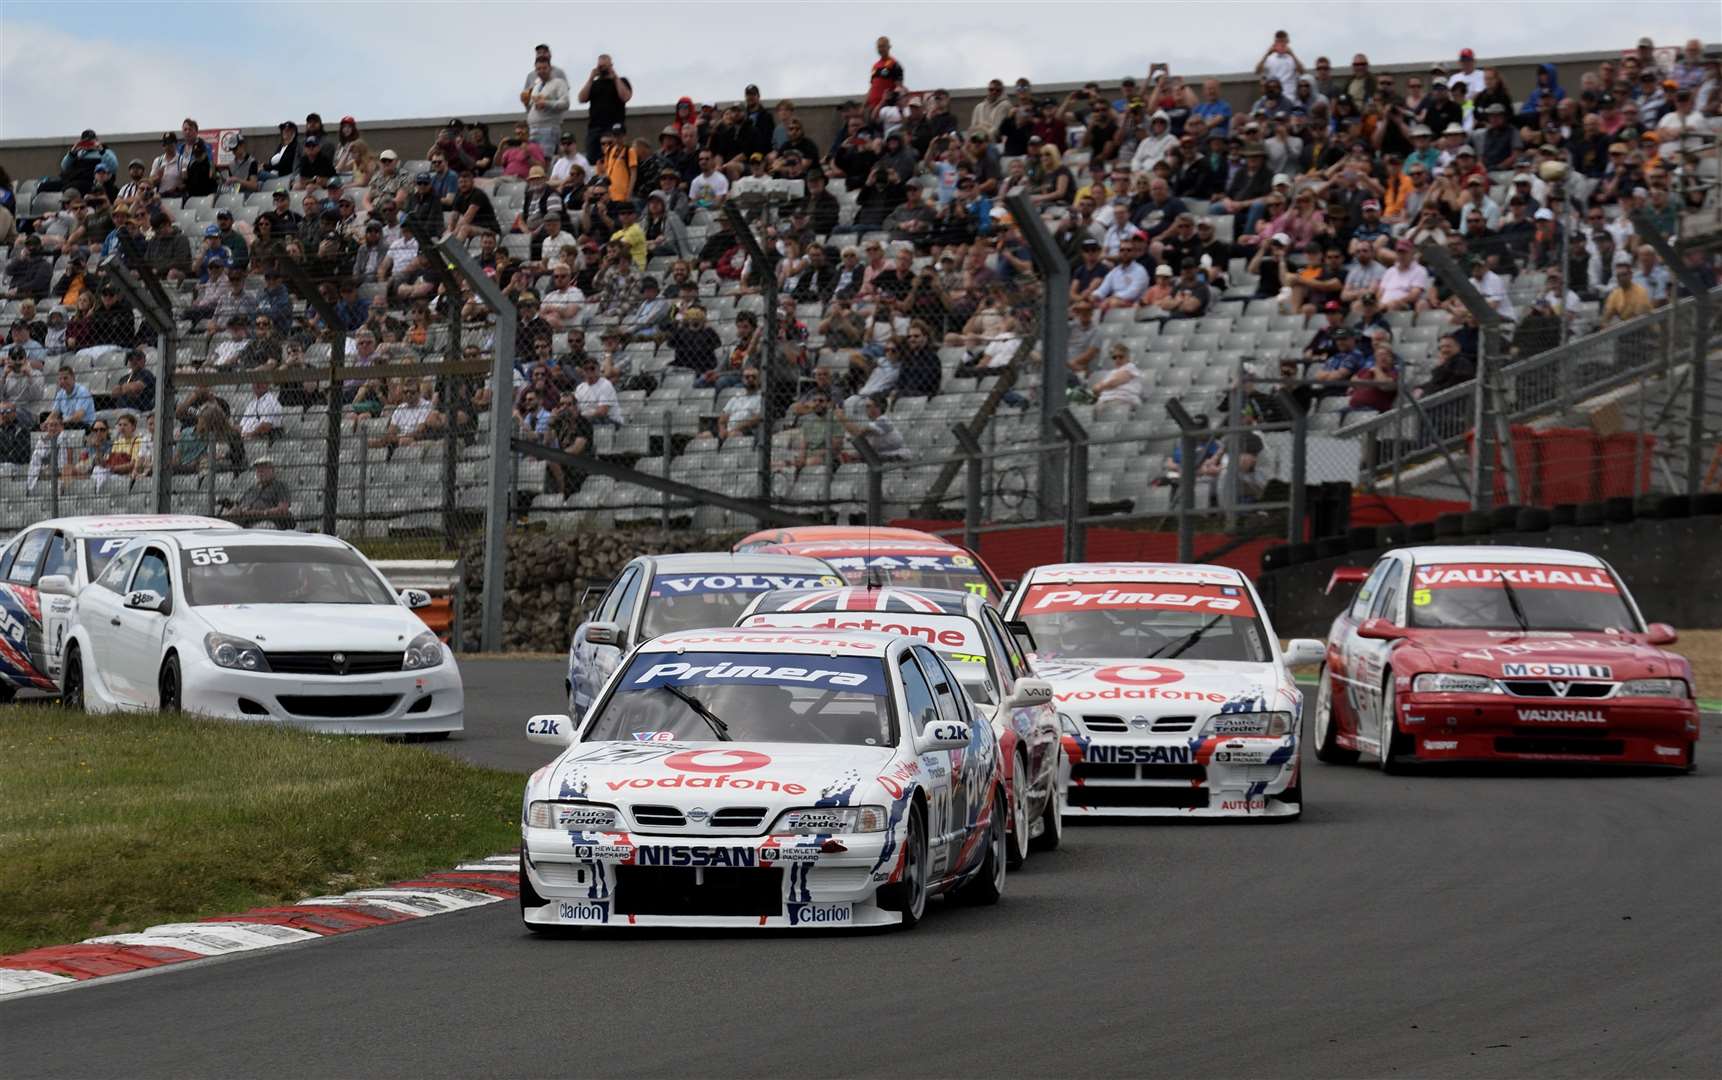 Hill leads the Super Tourer pack through Paddock. Picture: Simon Hildrew